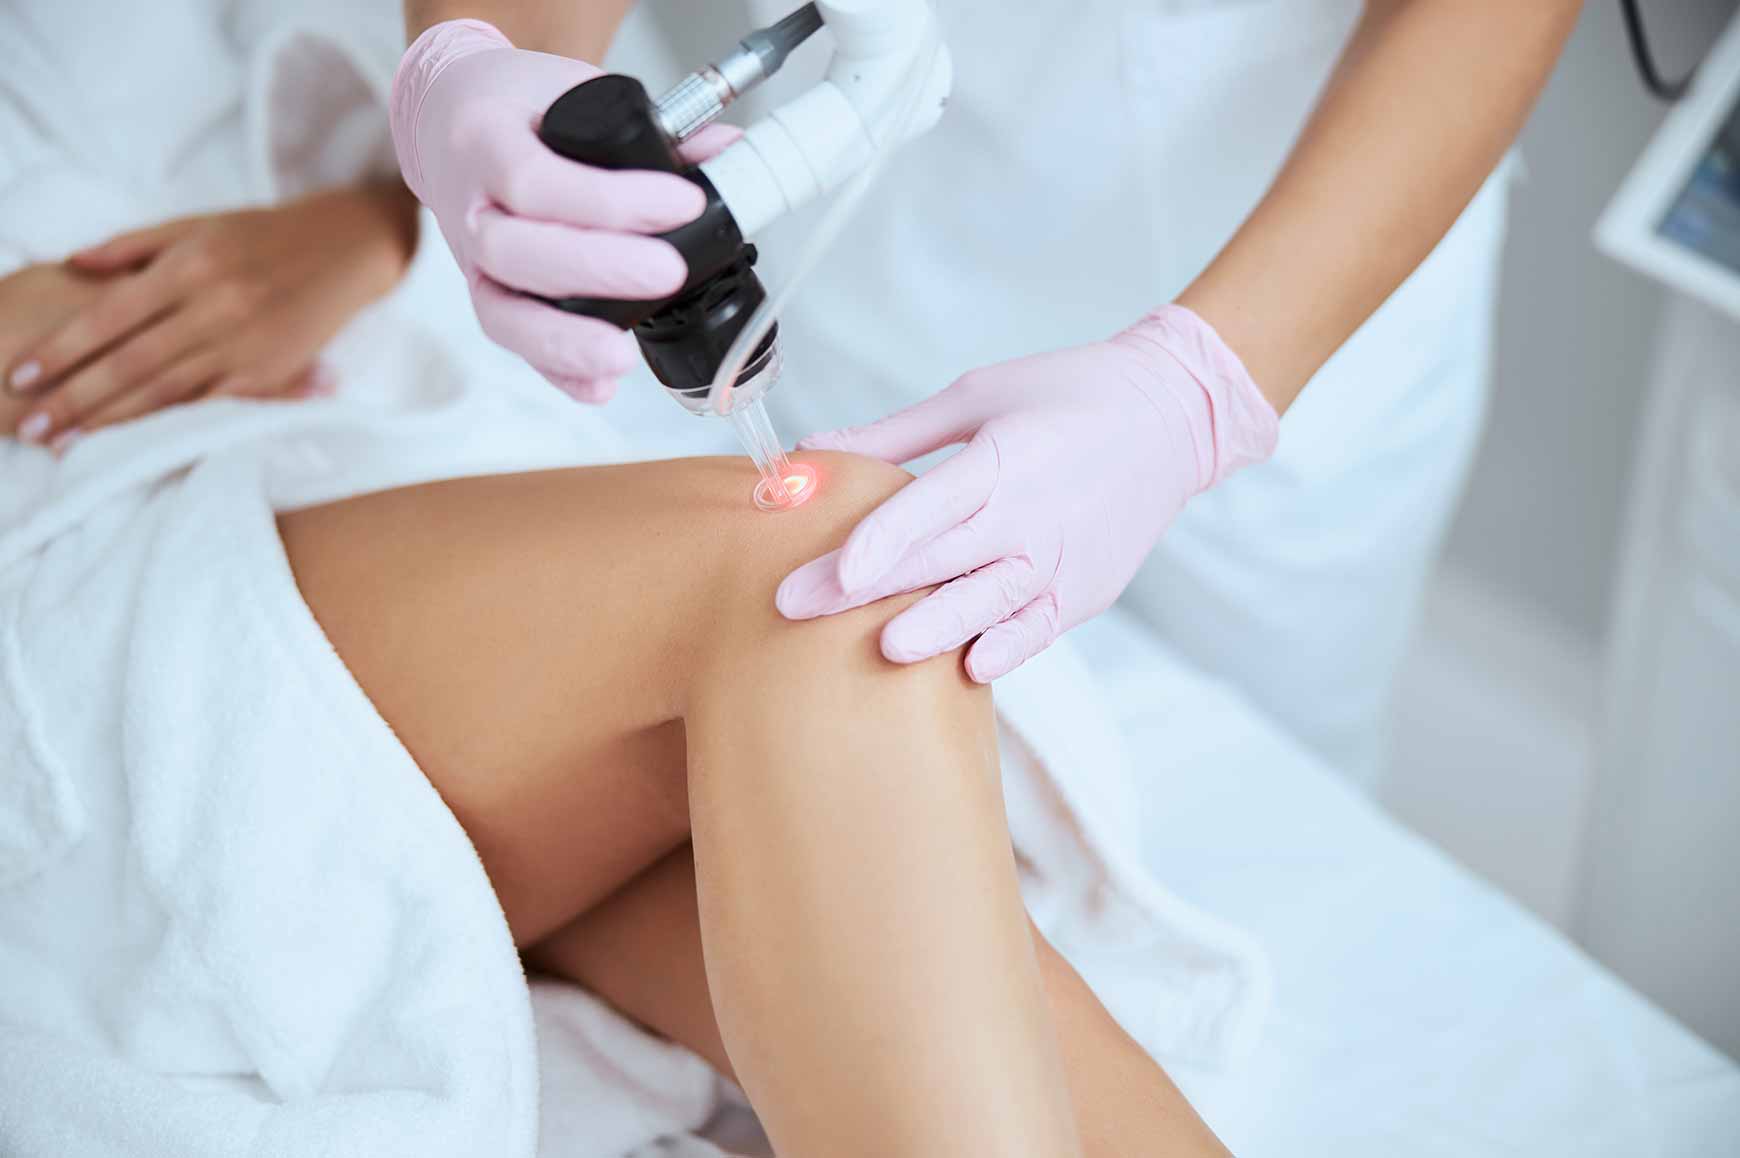 Laser therapy to help treat spider veins - contact Dr. Melissa Marks.